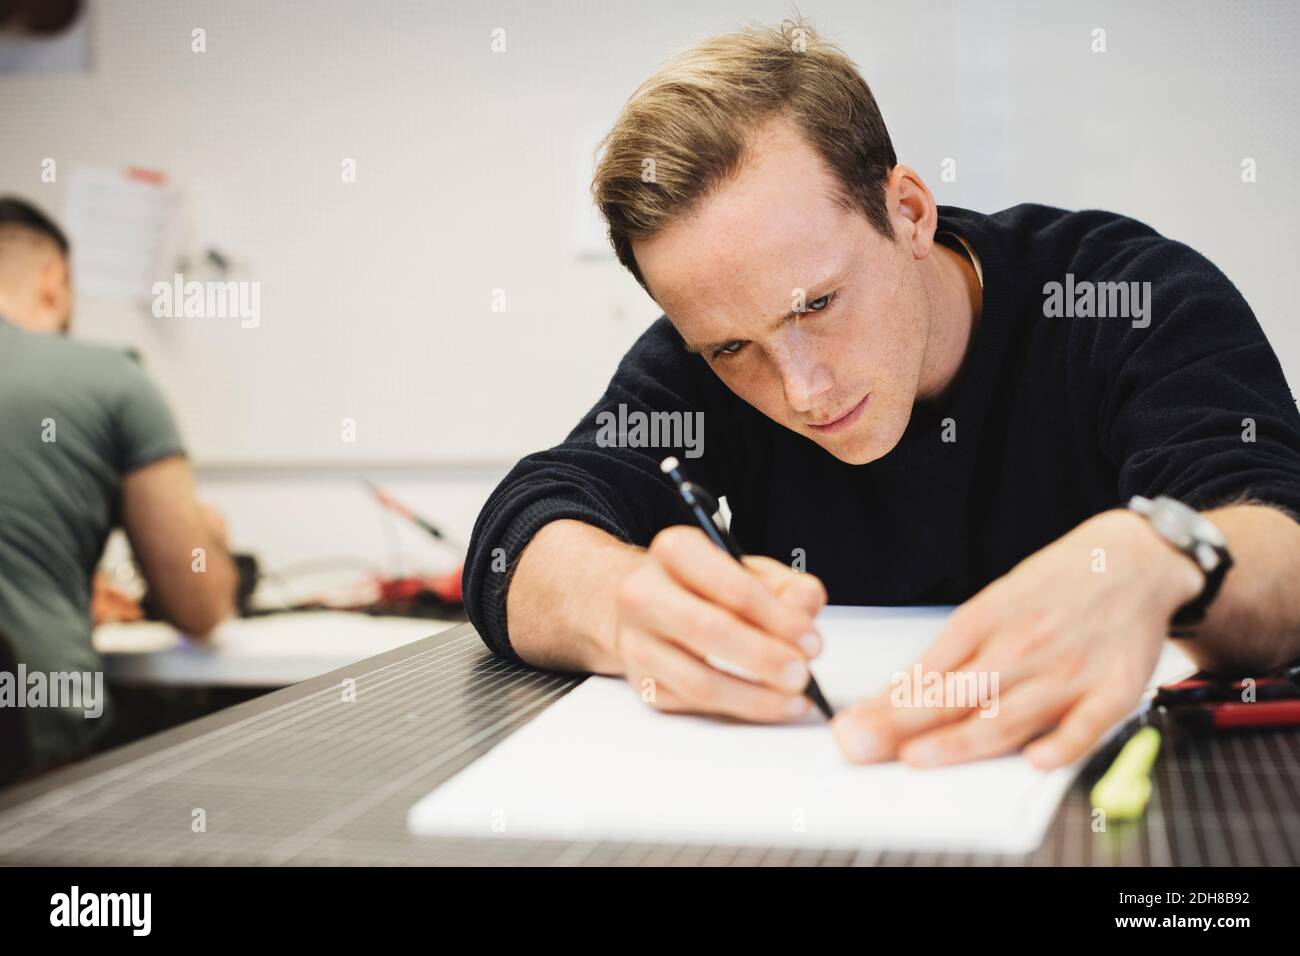 Engineer planning on paper at table with colleague in background Stock Photo